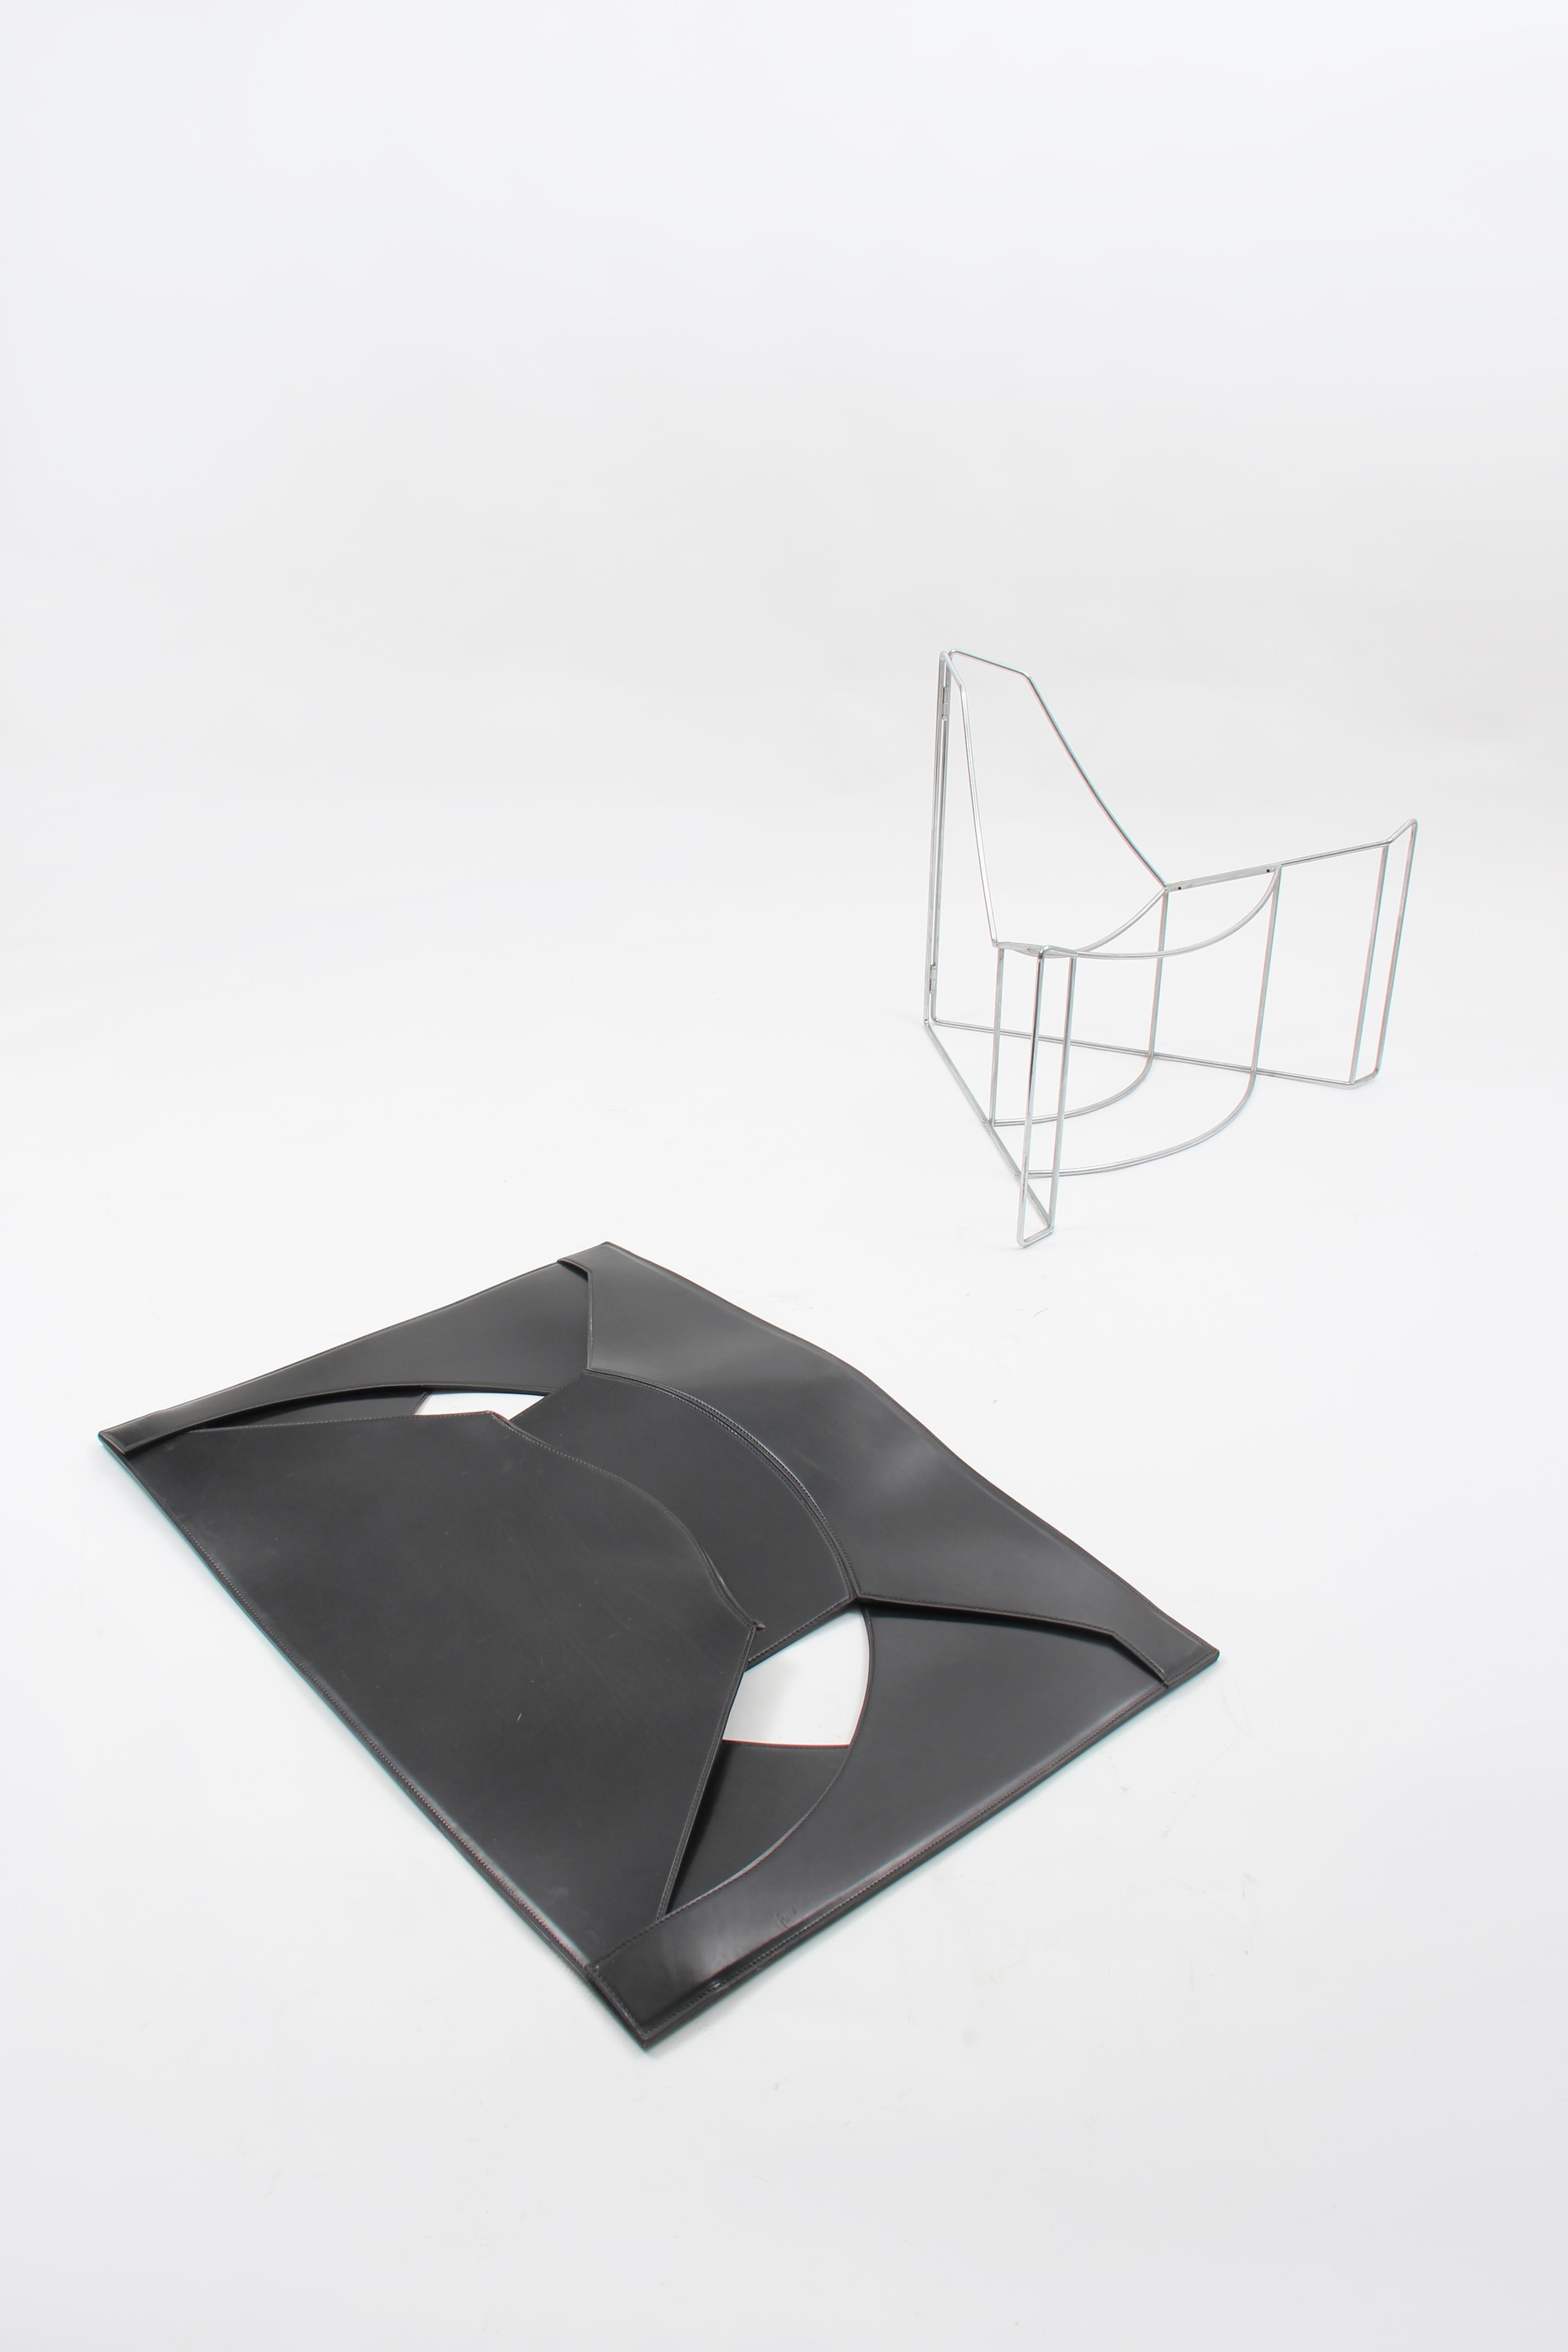 Lounge Chair by Jacques Harold Pollard for Matteo Grassi, 1990s For Sale 3